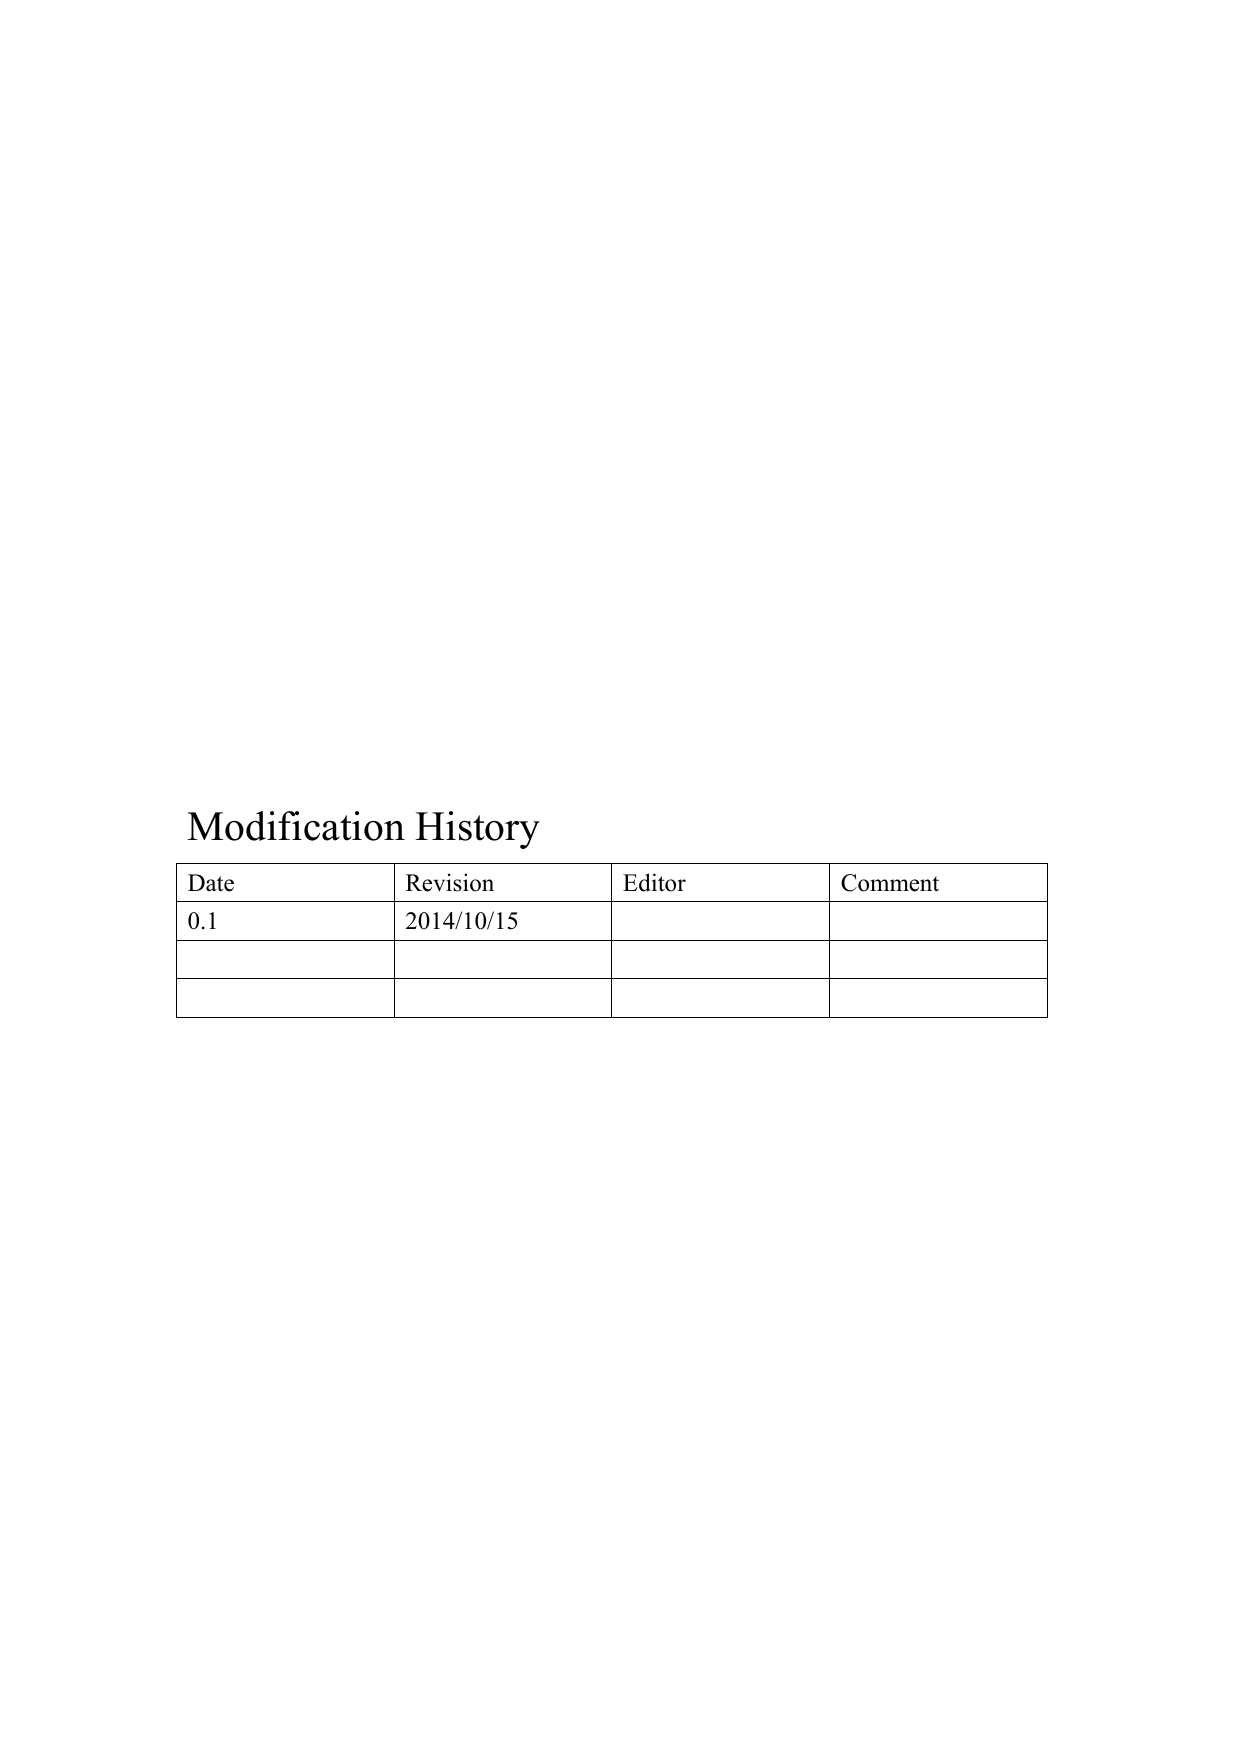                 Modification History Date Revision Editor Comment 0.1 2014/10/15             